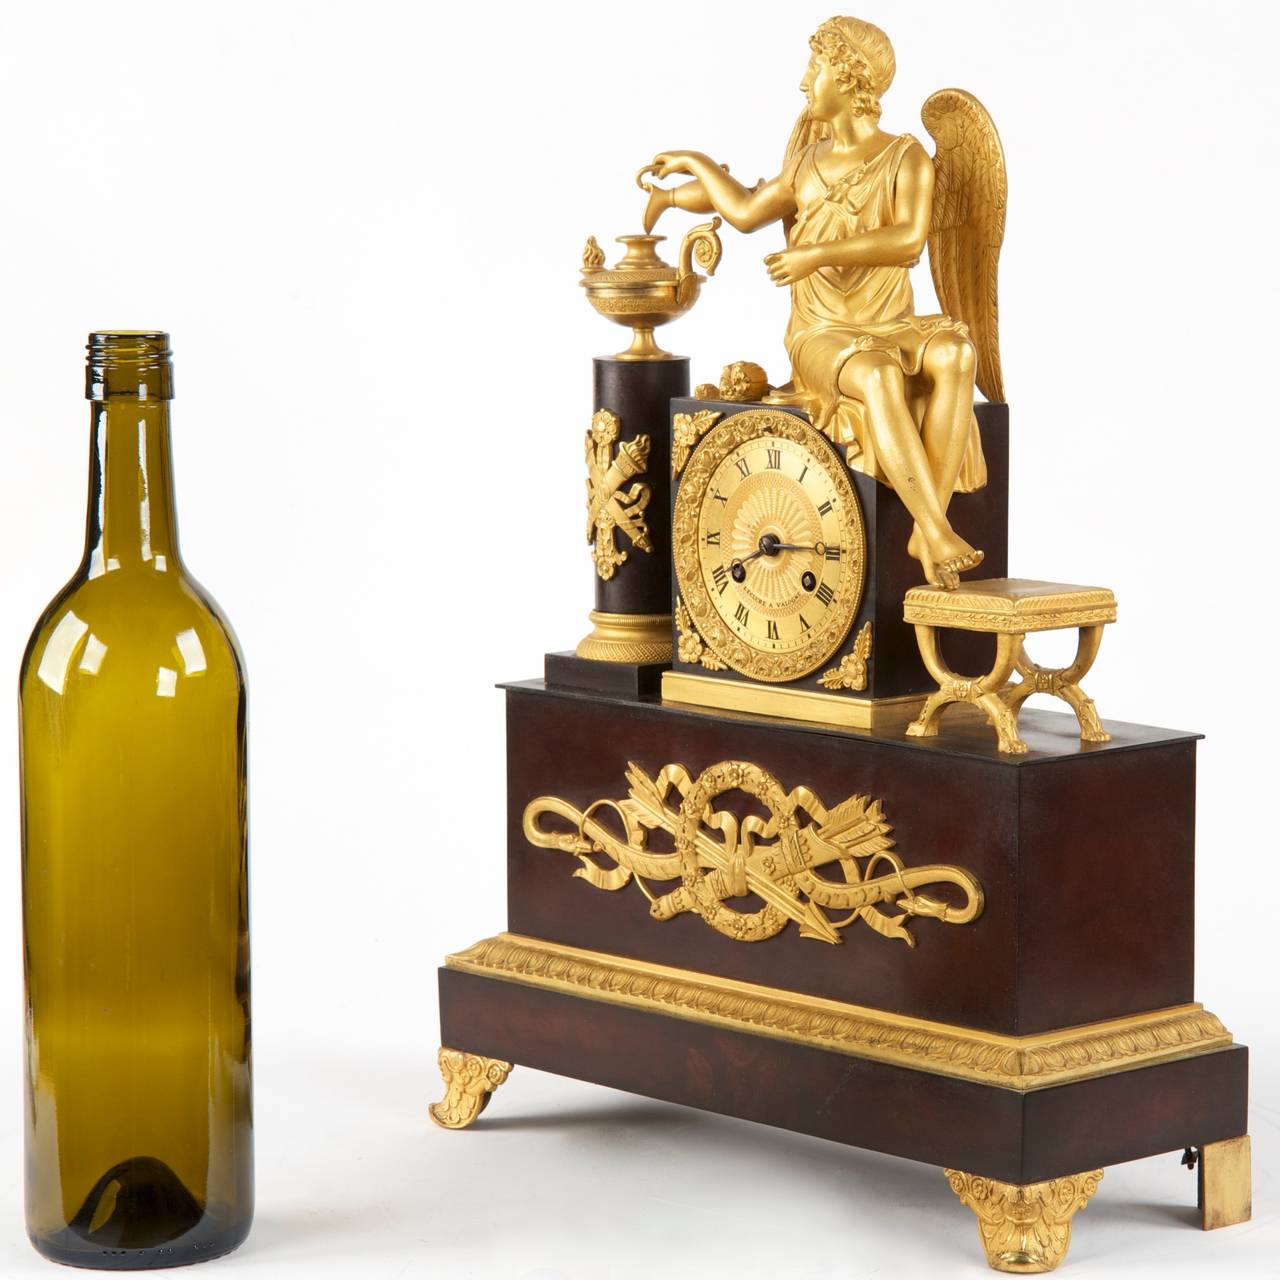 FRENCH GILT AND PATINATED BRONZE WINGED FIGURAL MANTEL CLOCK
Third Quarter of the 19th Century
Item #  502BNP20Q

An exceedingly fine work from the Second Empire, this Napoleon III Period mantel clock features a winged figural in a flowing garb